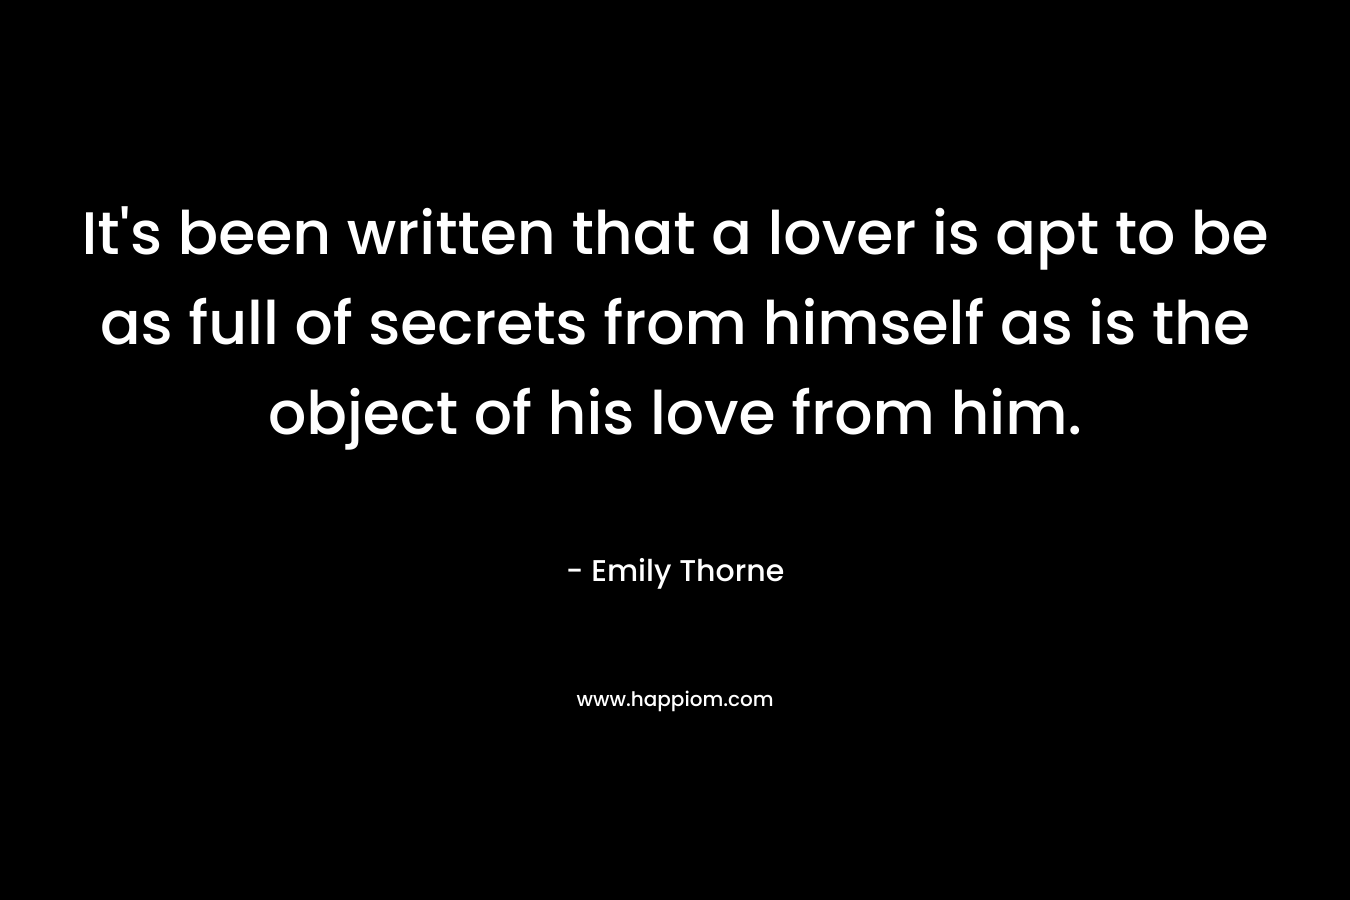 It’s been written that a lover is apt to be as full of secrets from himself as is the object of his love from him. – Emily Thorne